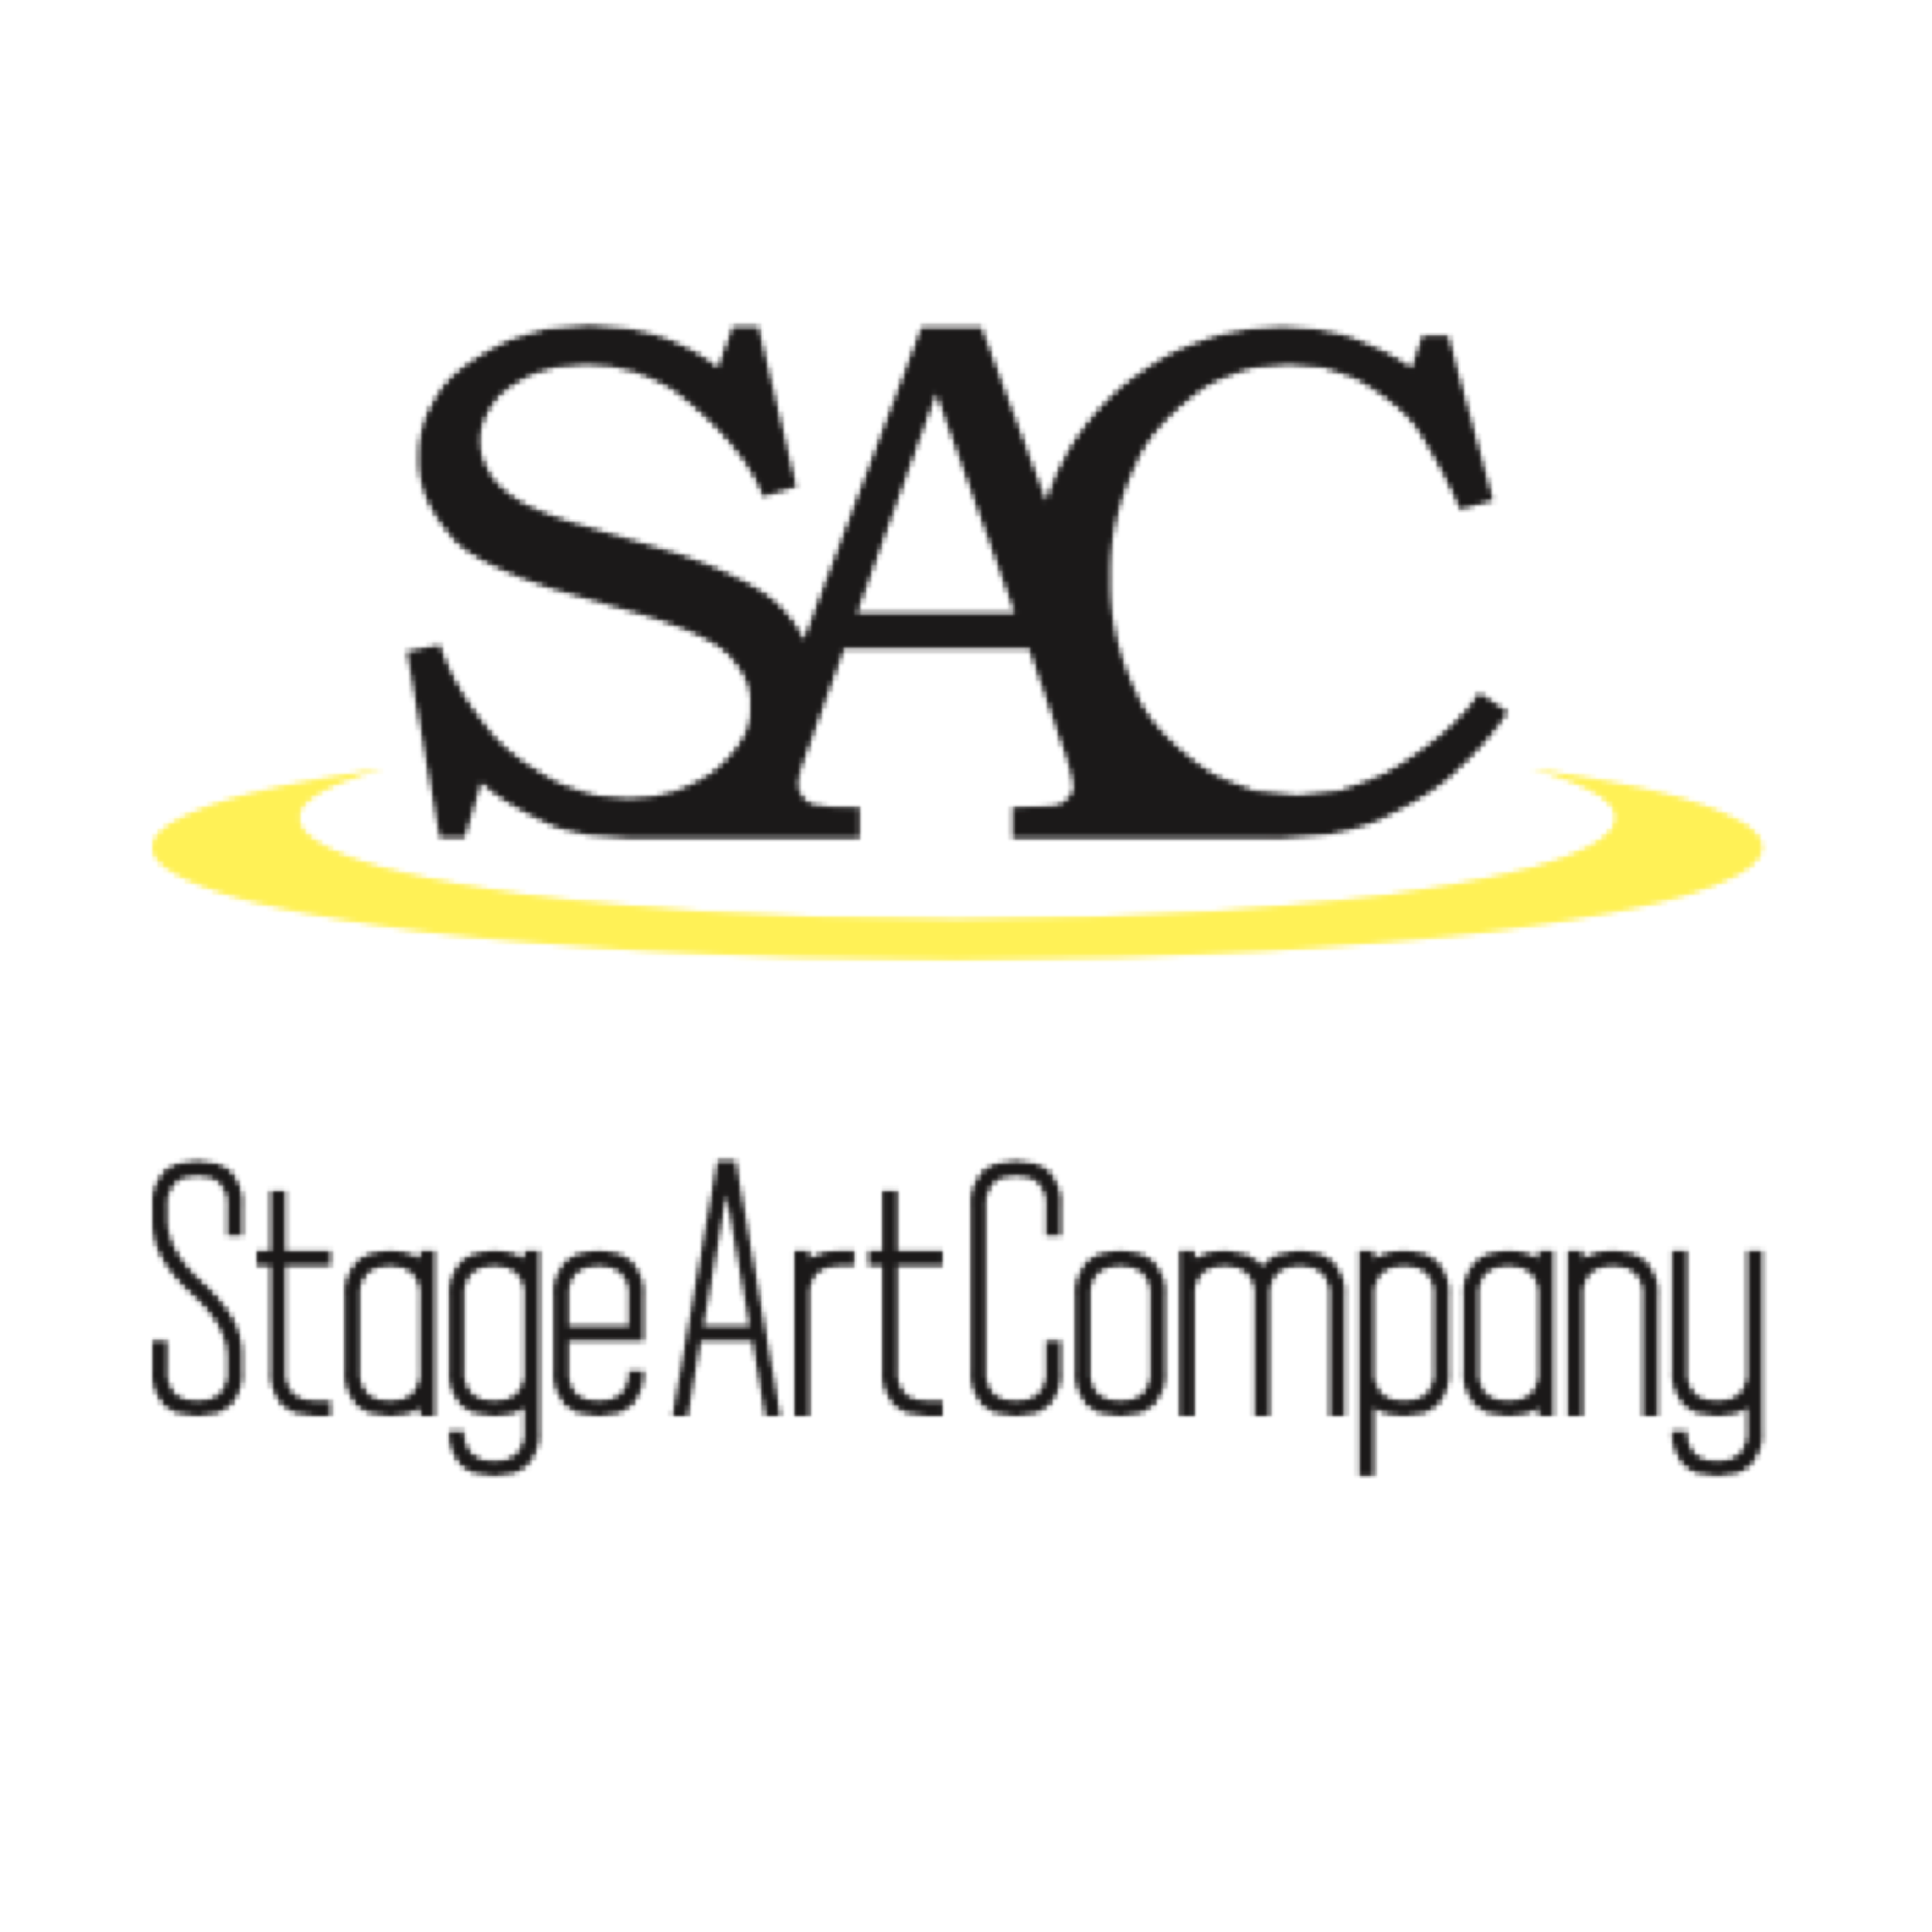 <br />
<b>Warning</b>:  Use of undefined constant alt - assumed 'alt' (this will throw an Error in a future version of PHP) in <b>/home/stageart/www/sac/wp/wp-content/themes/stageartcompany2021/single-event_info.php</b> on line <b>372</b><br />
